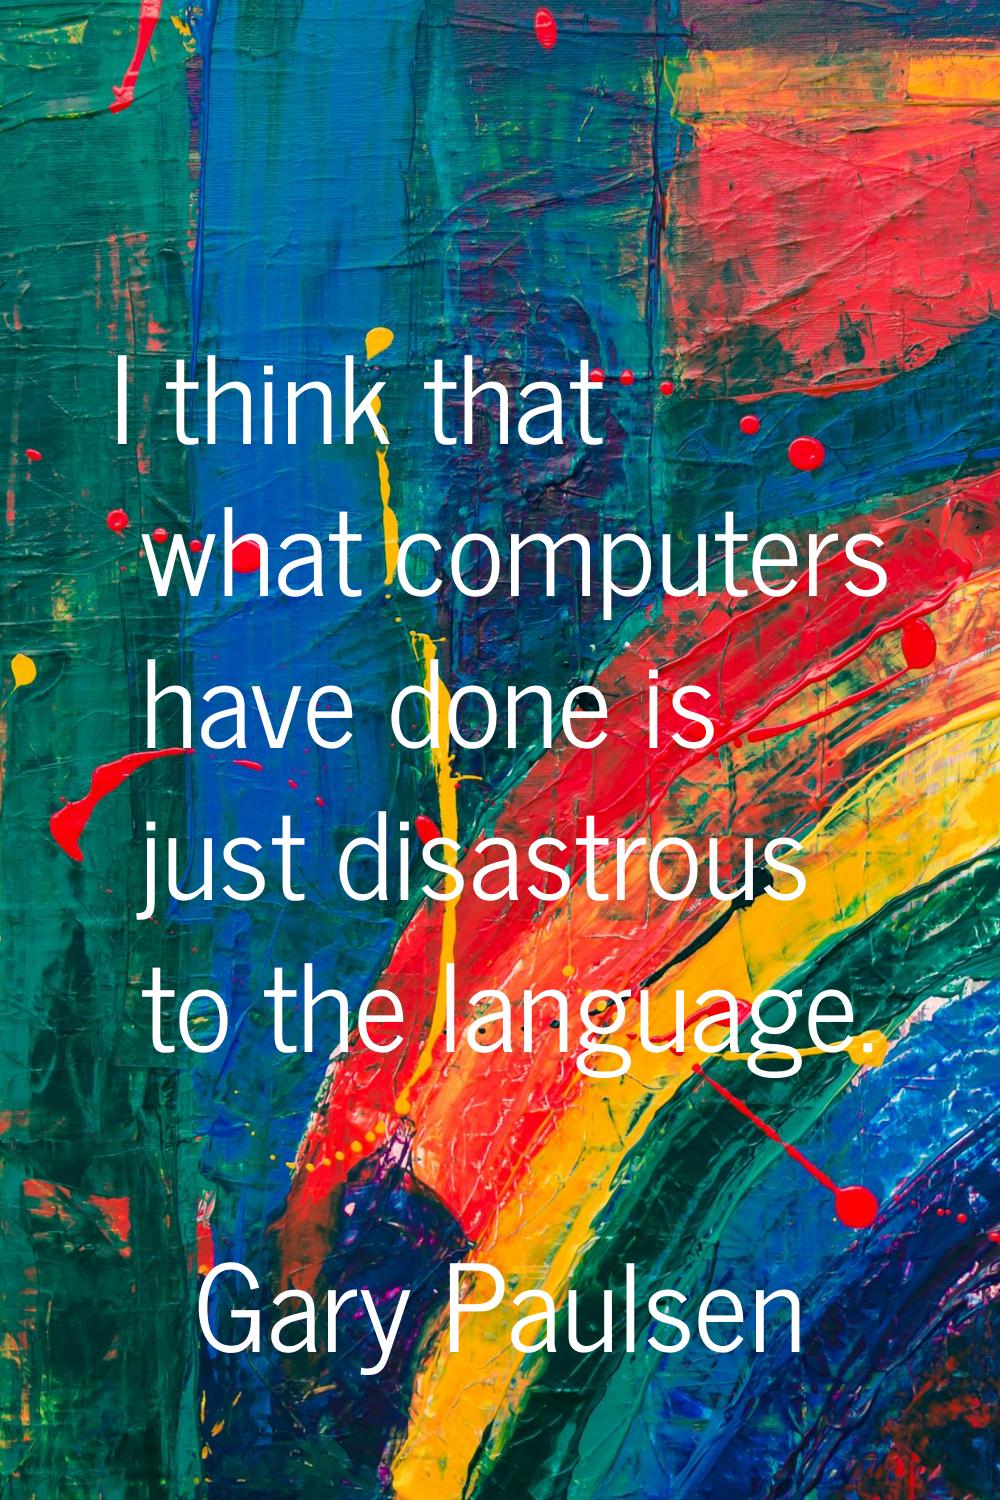 I think that what computers have done is just disastrous to the language.